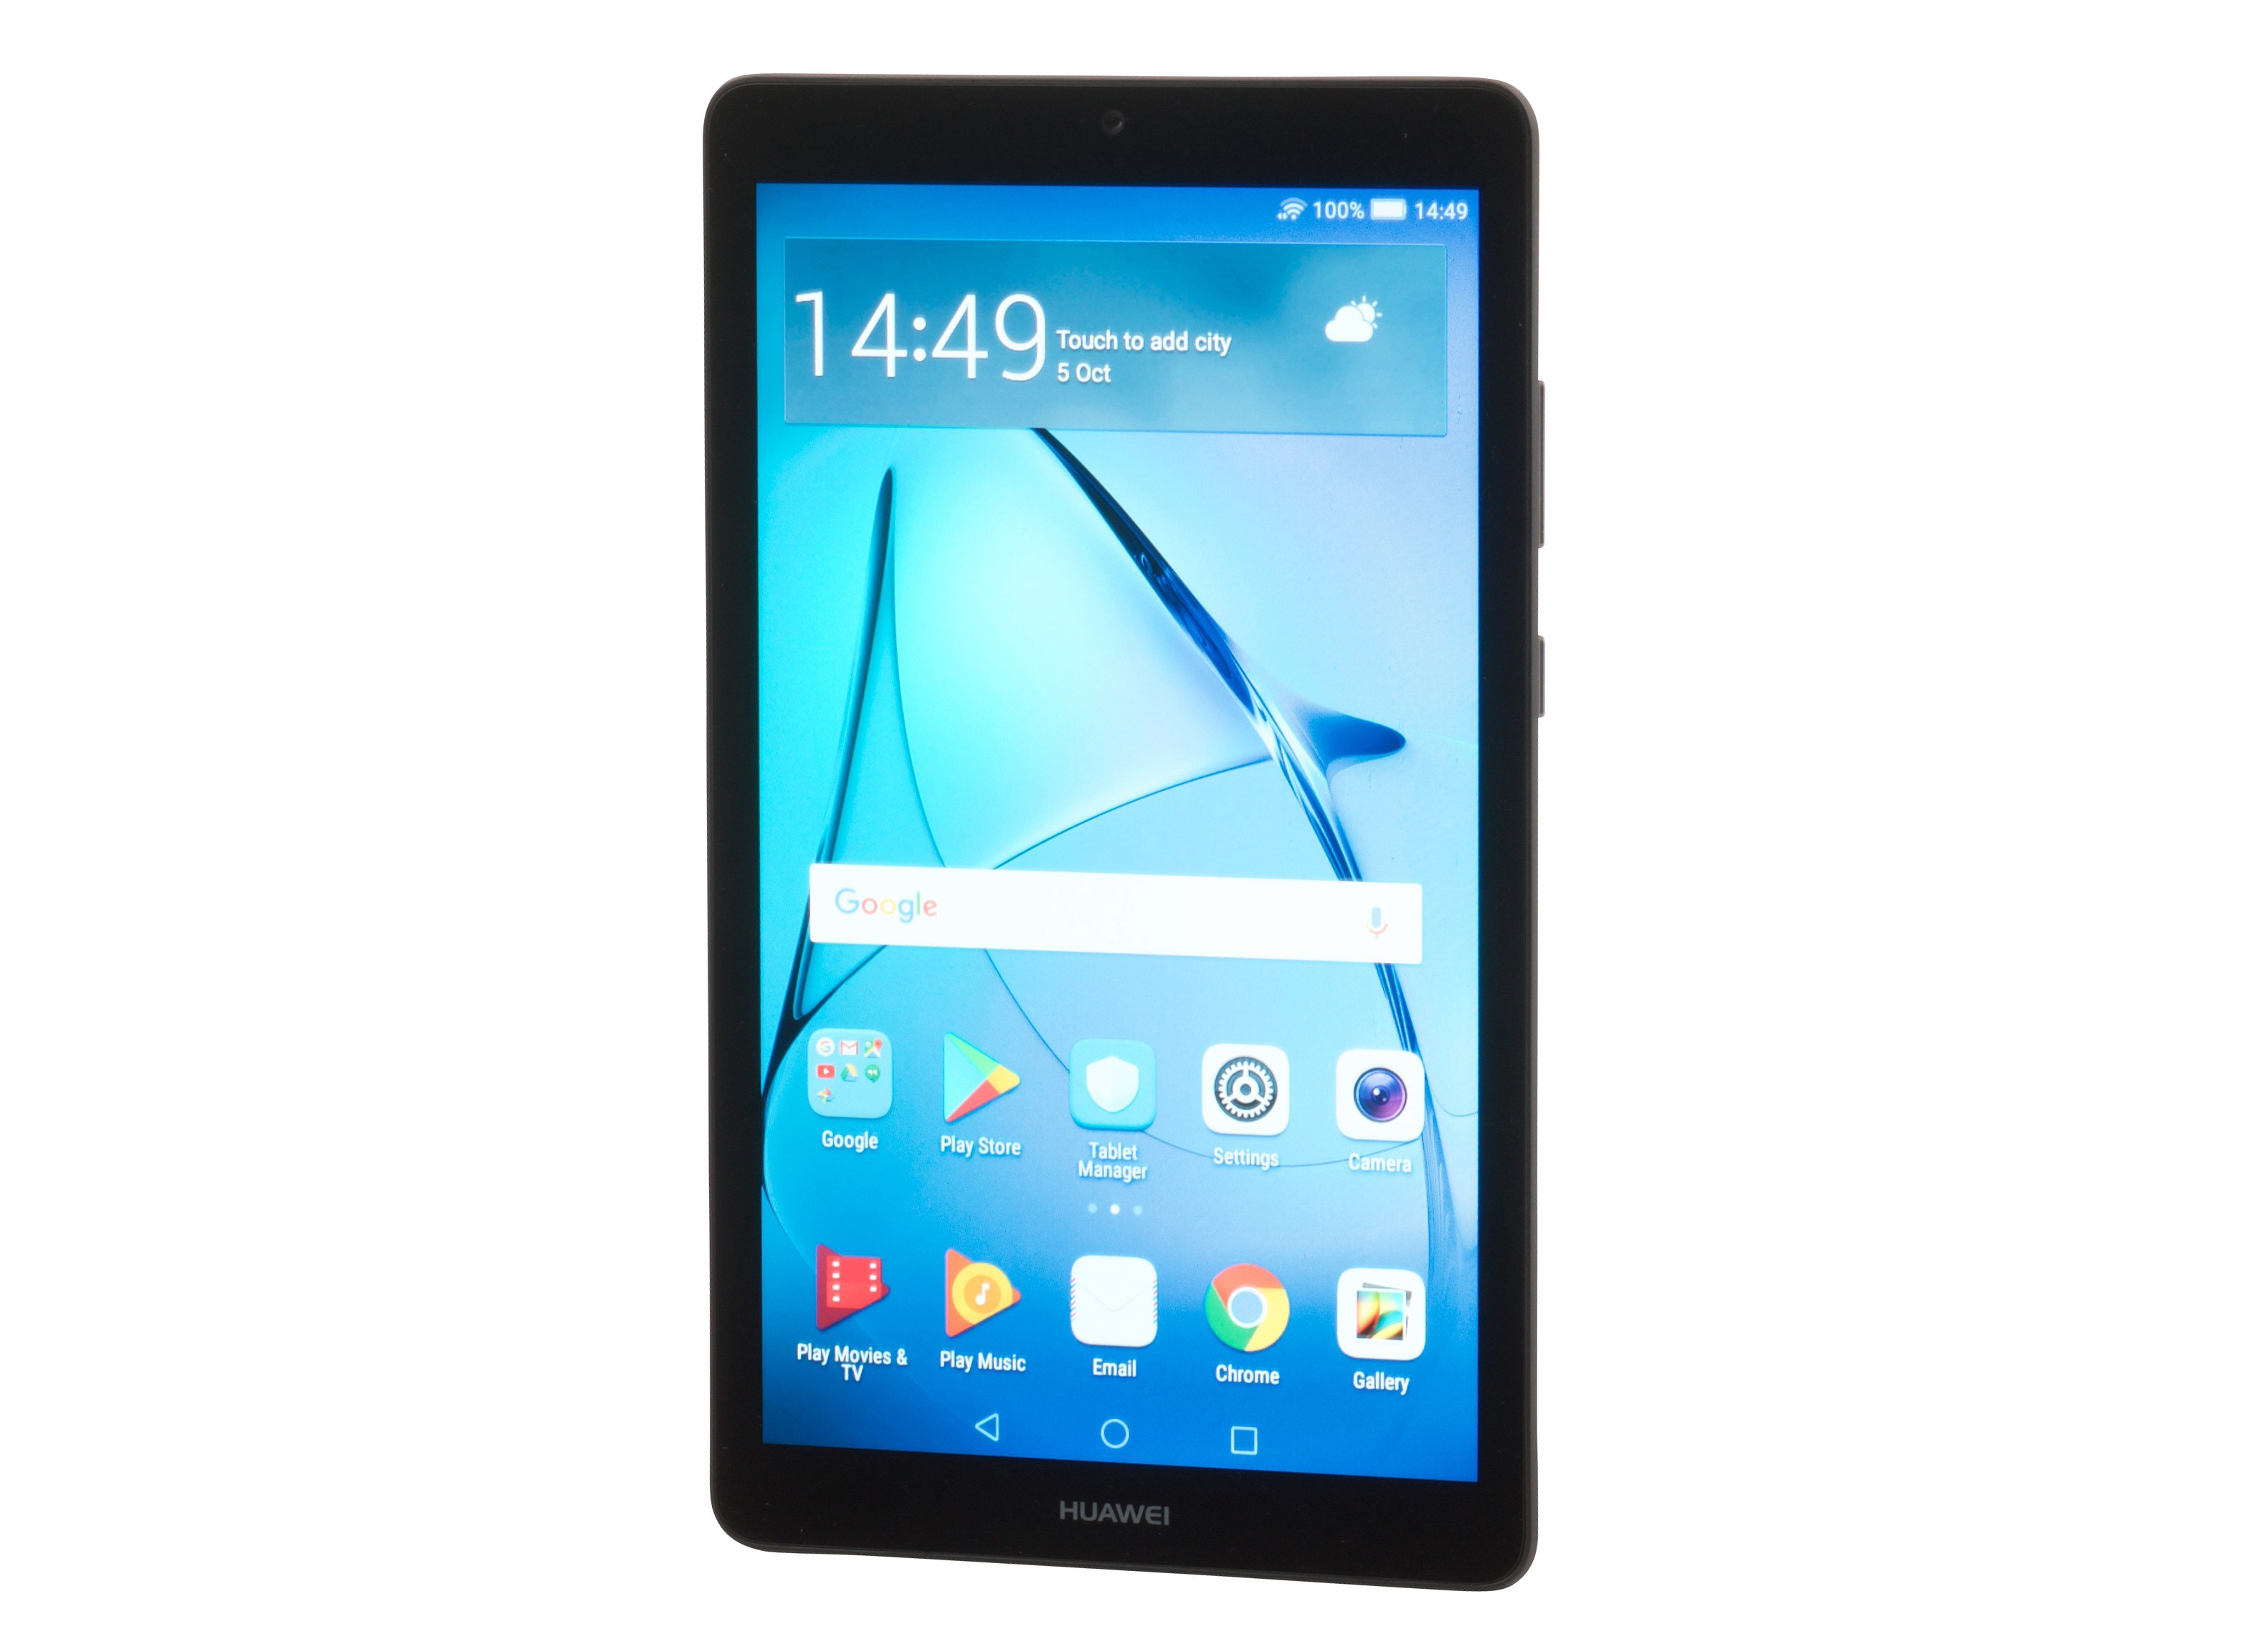 Huawei MediaPad T3 7 (16GB) Tablet Review - Consumer Reports